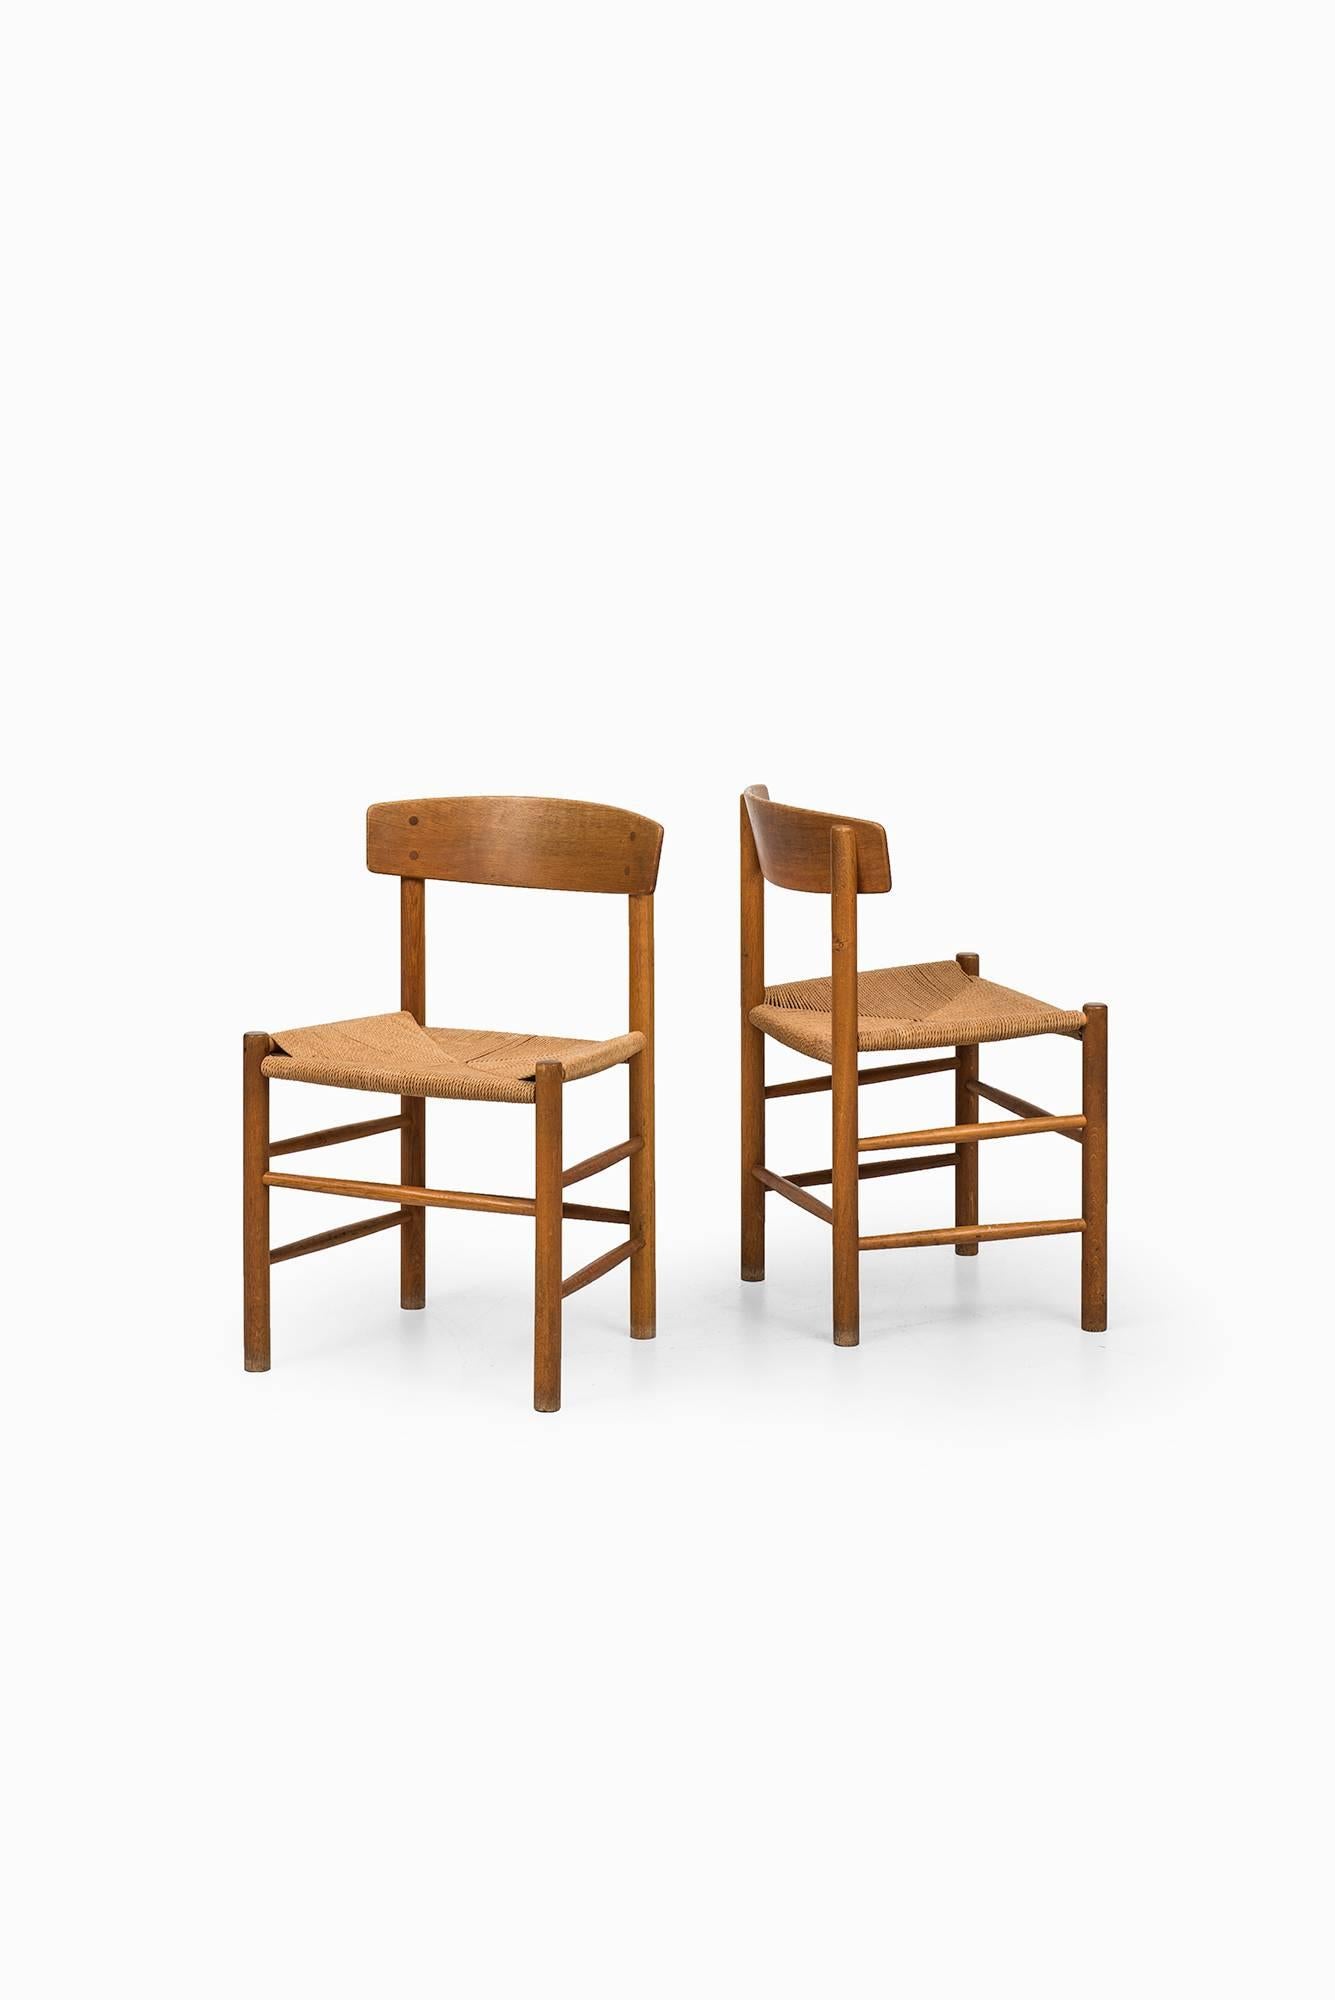 A set of 8 dining chairs model Shaker / J39 designed by Børge Mogensen. Produced by FDB møbler in Denmark.